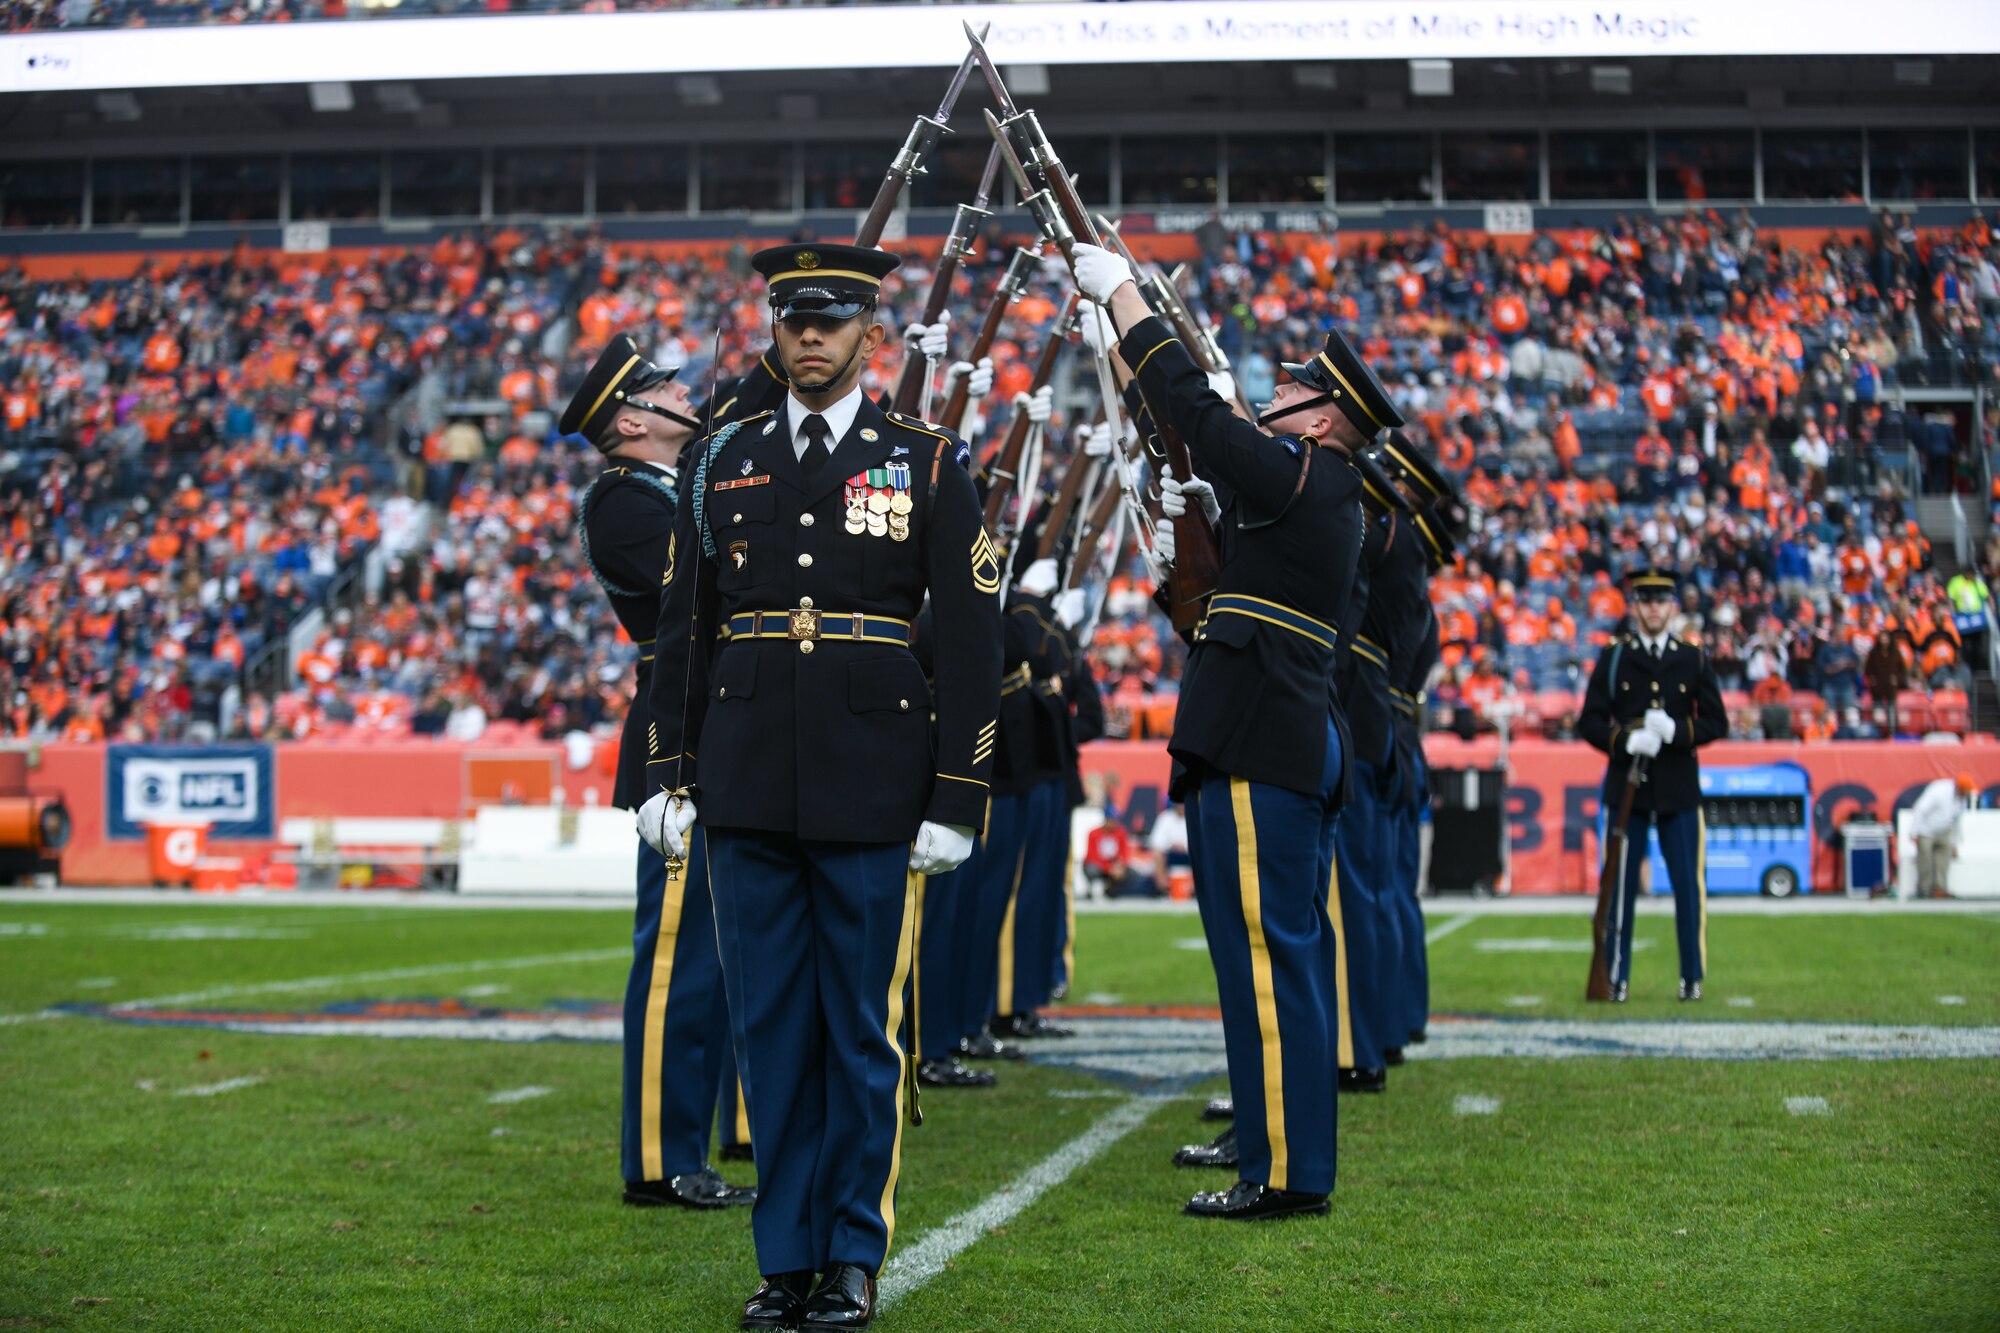 The U.S. Army Drill Team from Washington D.C.,performs during the halftime show for the Denver Broncos Salute to Service game, Nov. 3, 2019, at Empower Field in Mile High in Denver.